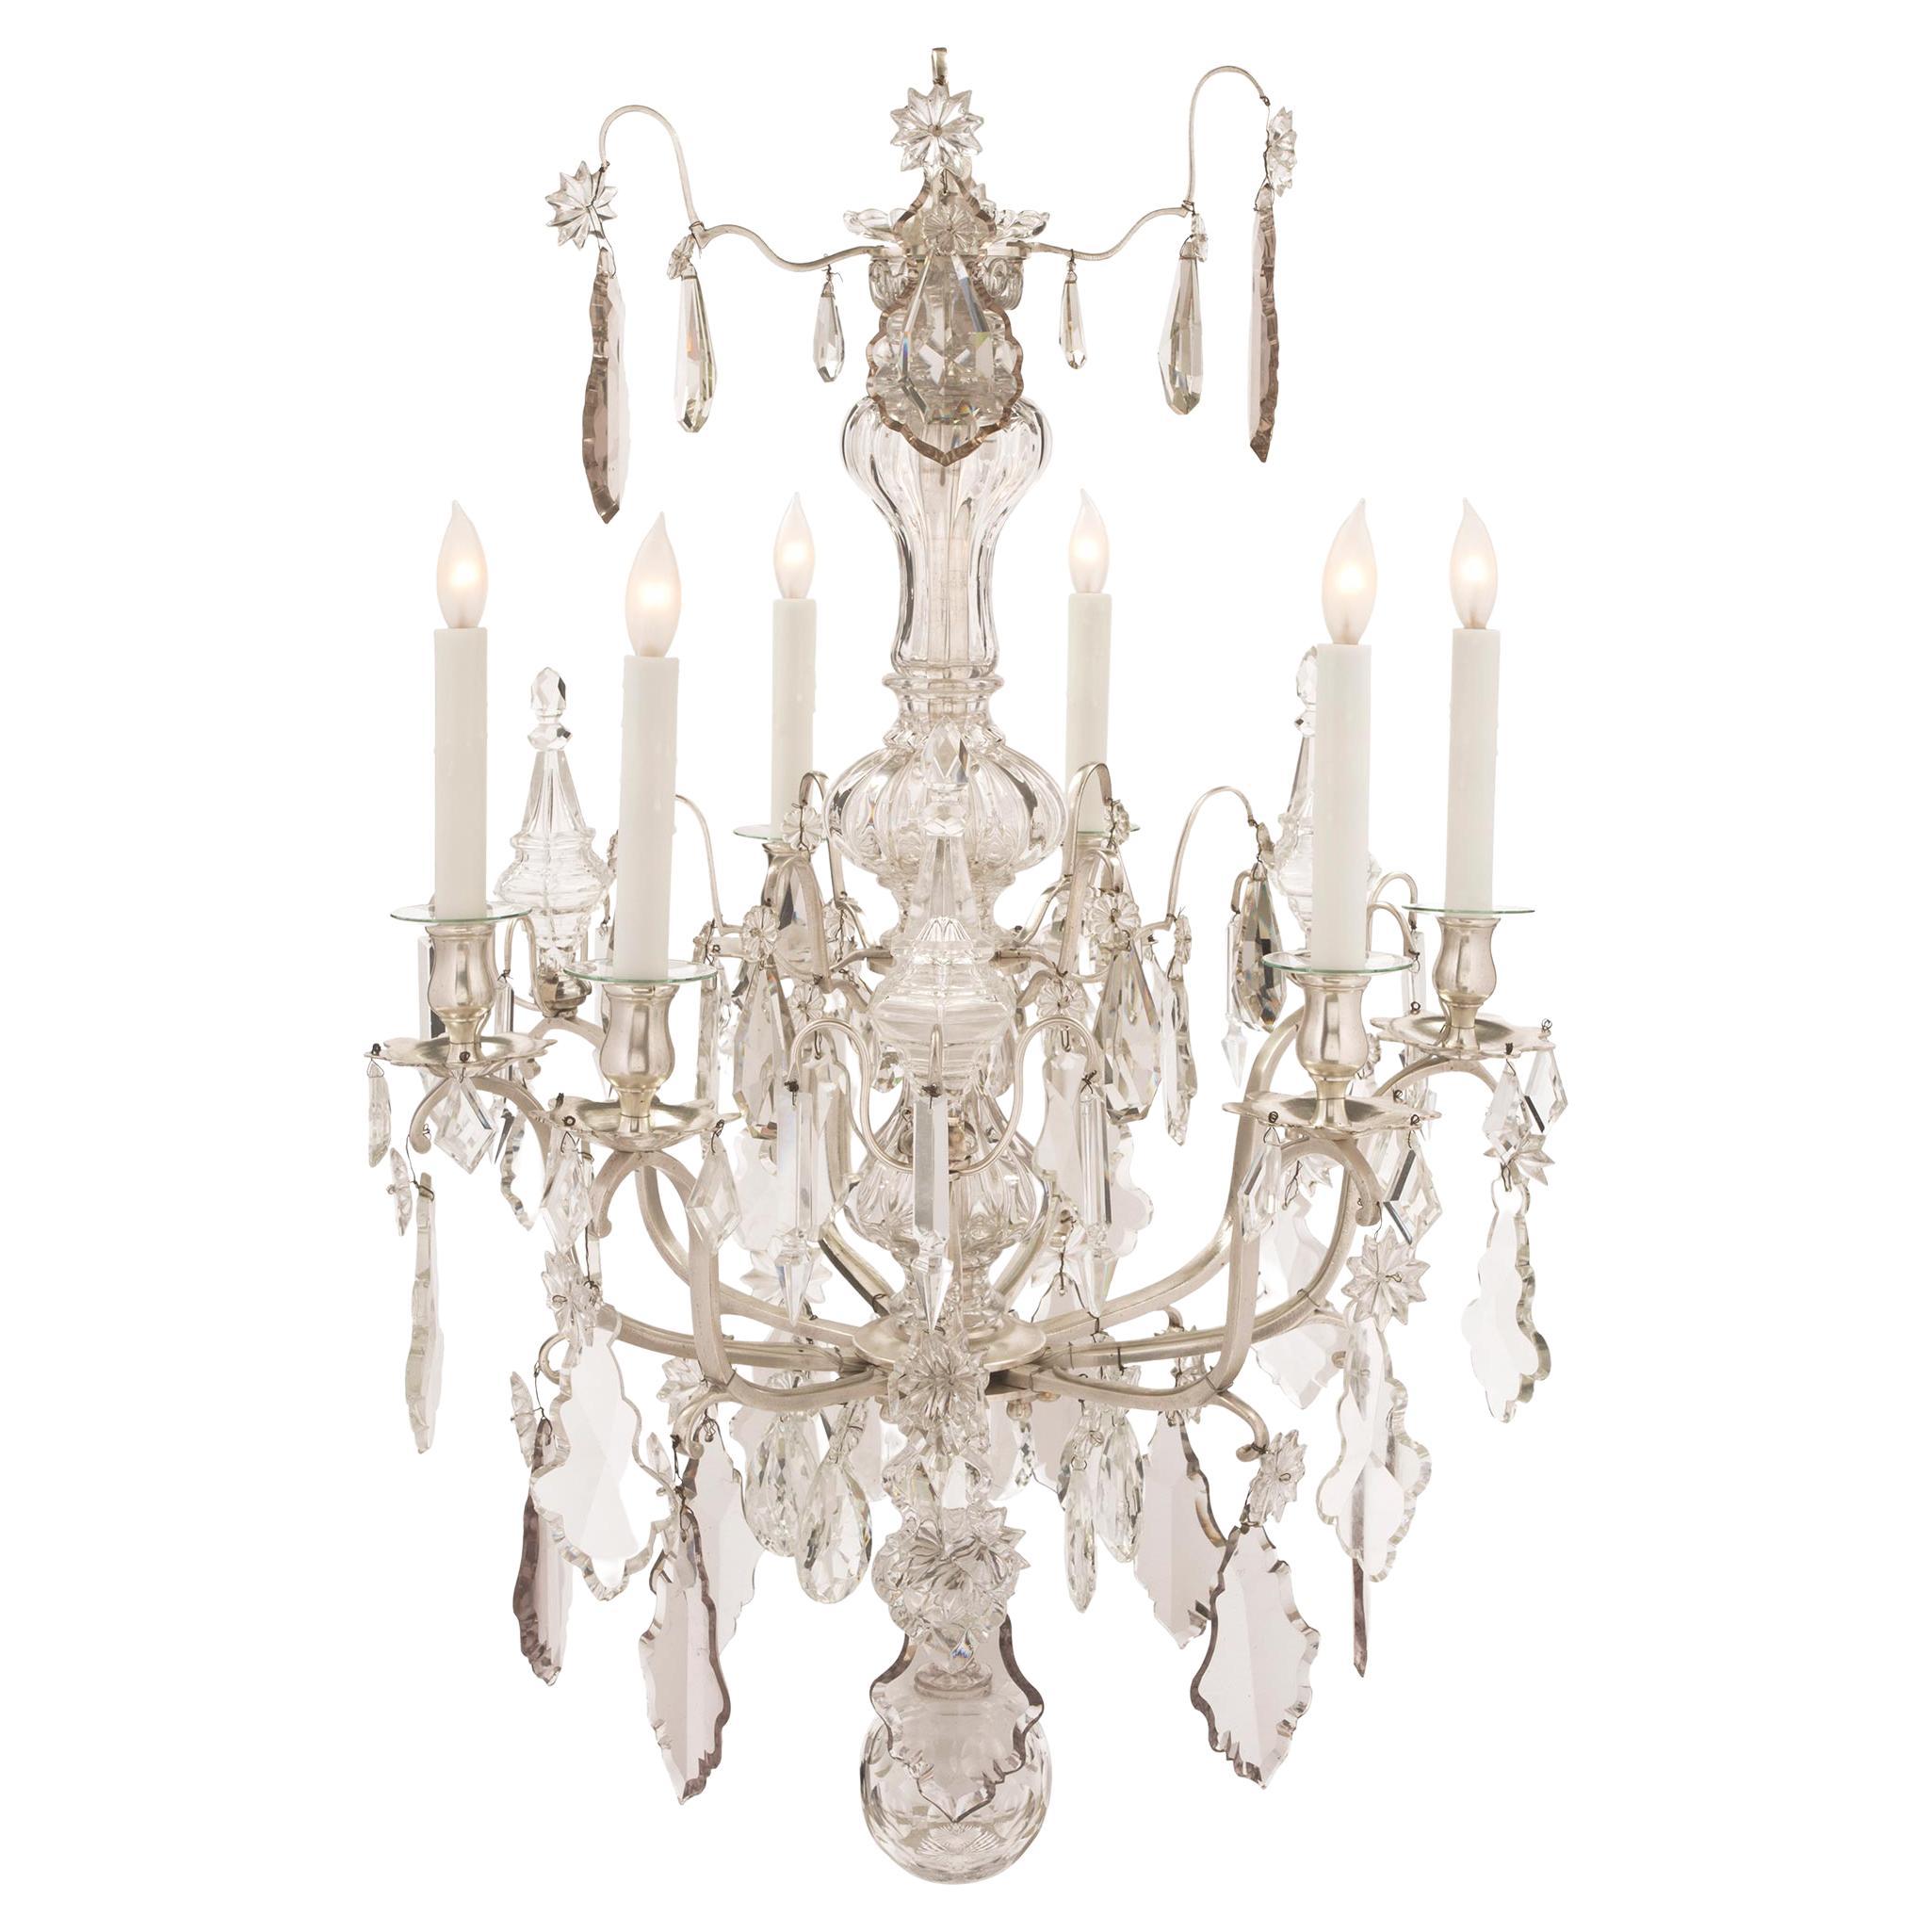 French Mid-19th Century Louis XV Style Bronze and Baccarat Crystal Chandelier For Sale